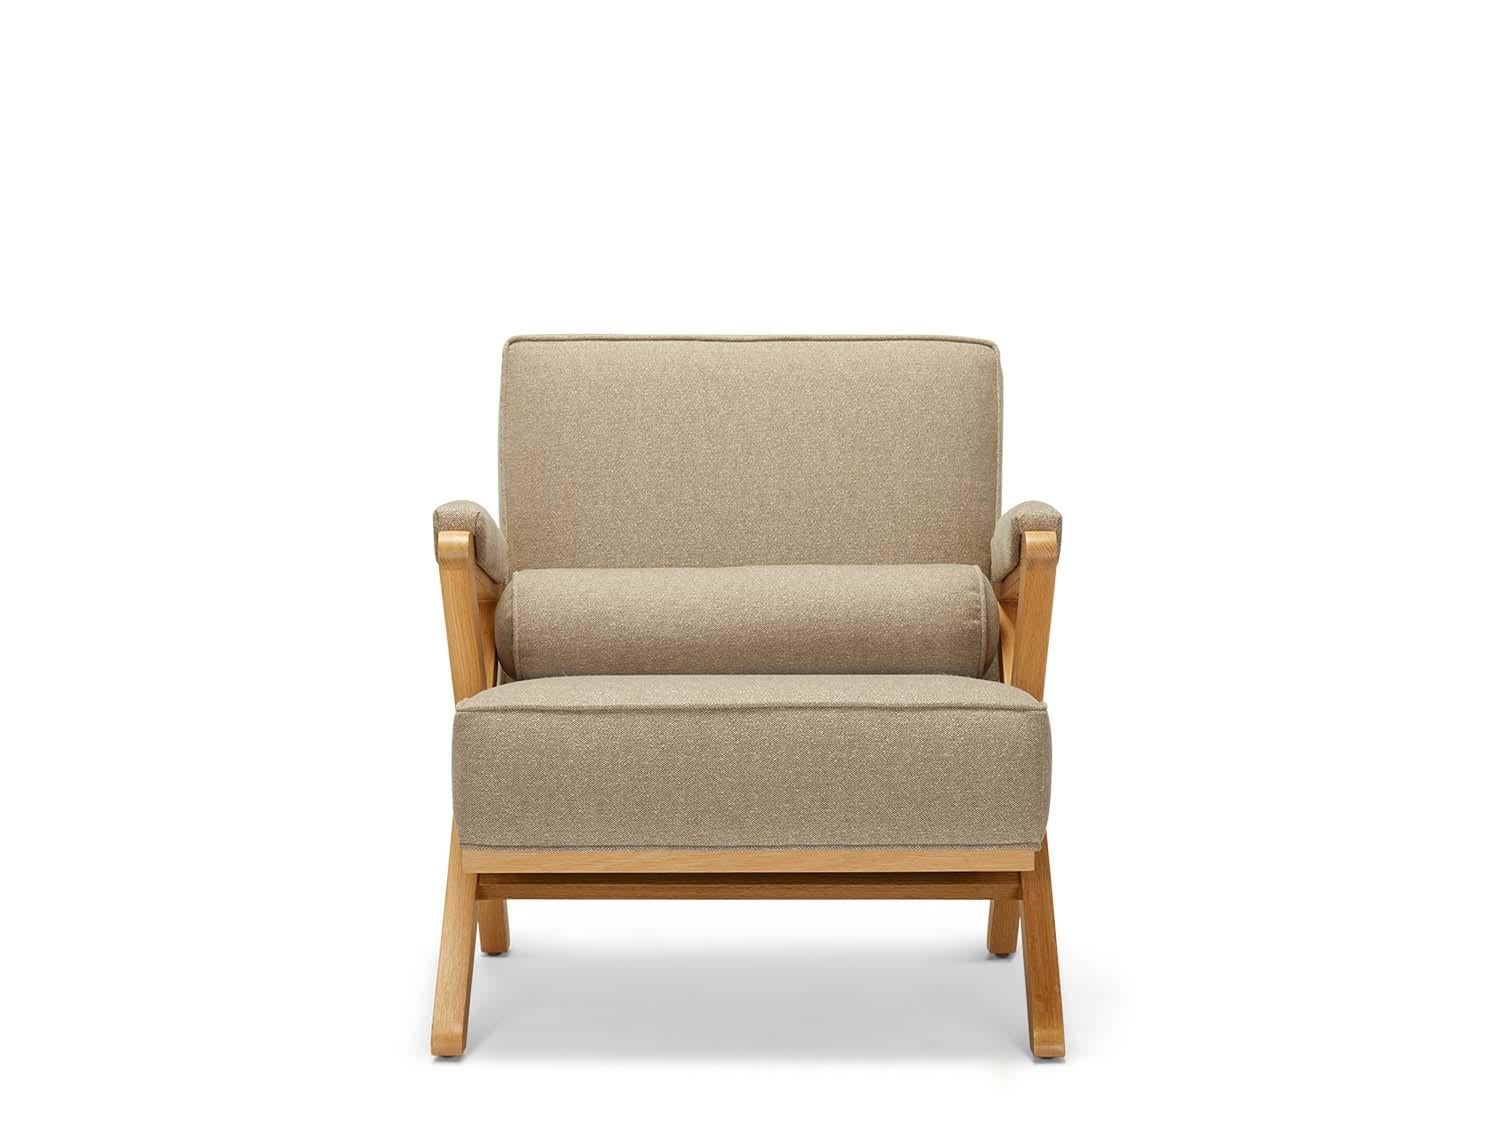 The Dillon chair has a solid American walnut or white oak x-based frame that features boxed cushions with piping and buttons on the back cushion. 

The Lawson-Fenning Collection is designed and handmade in Los Angeles, California. Reach out to